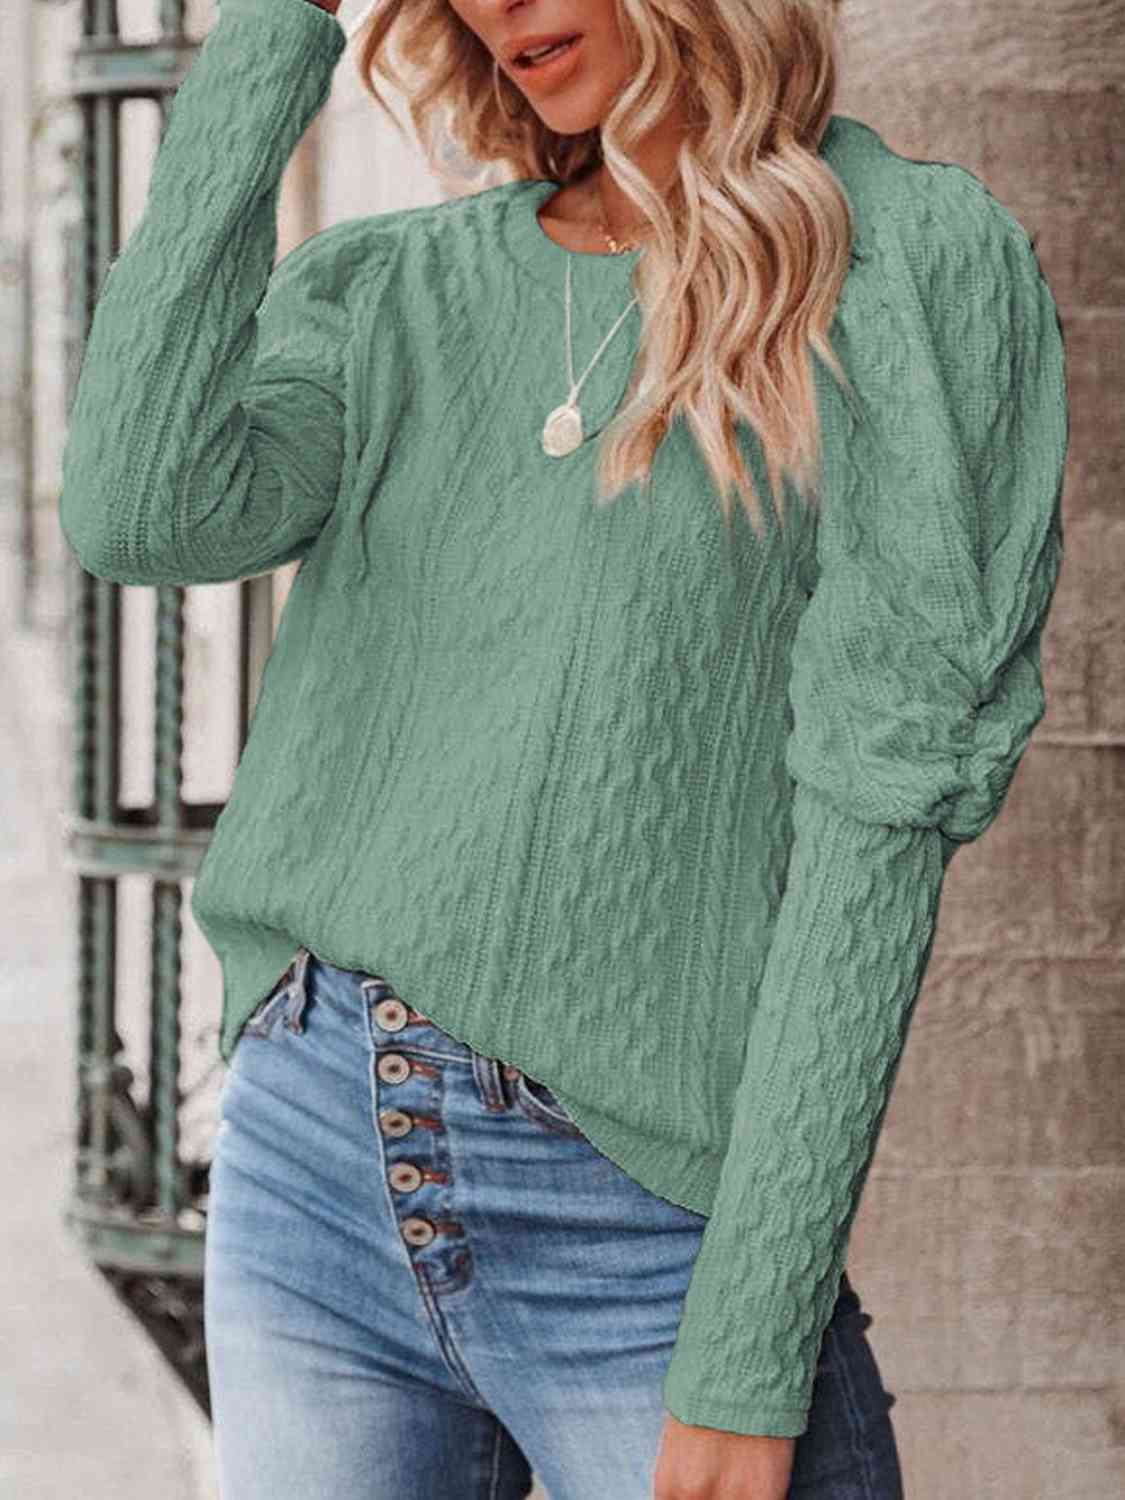 Round Neck Puff Sleeve Knit Top (5 Colors) Shirts & Tops Krazy Heart Designs Boutique Teal S 